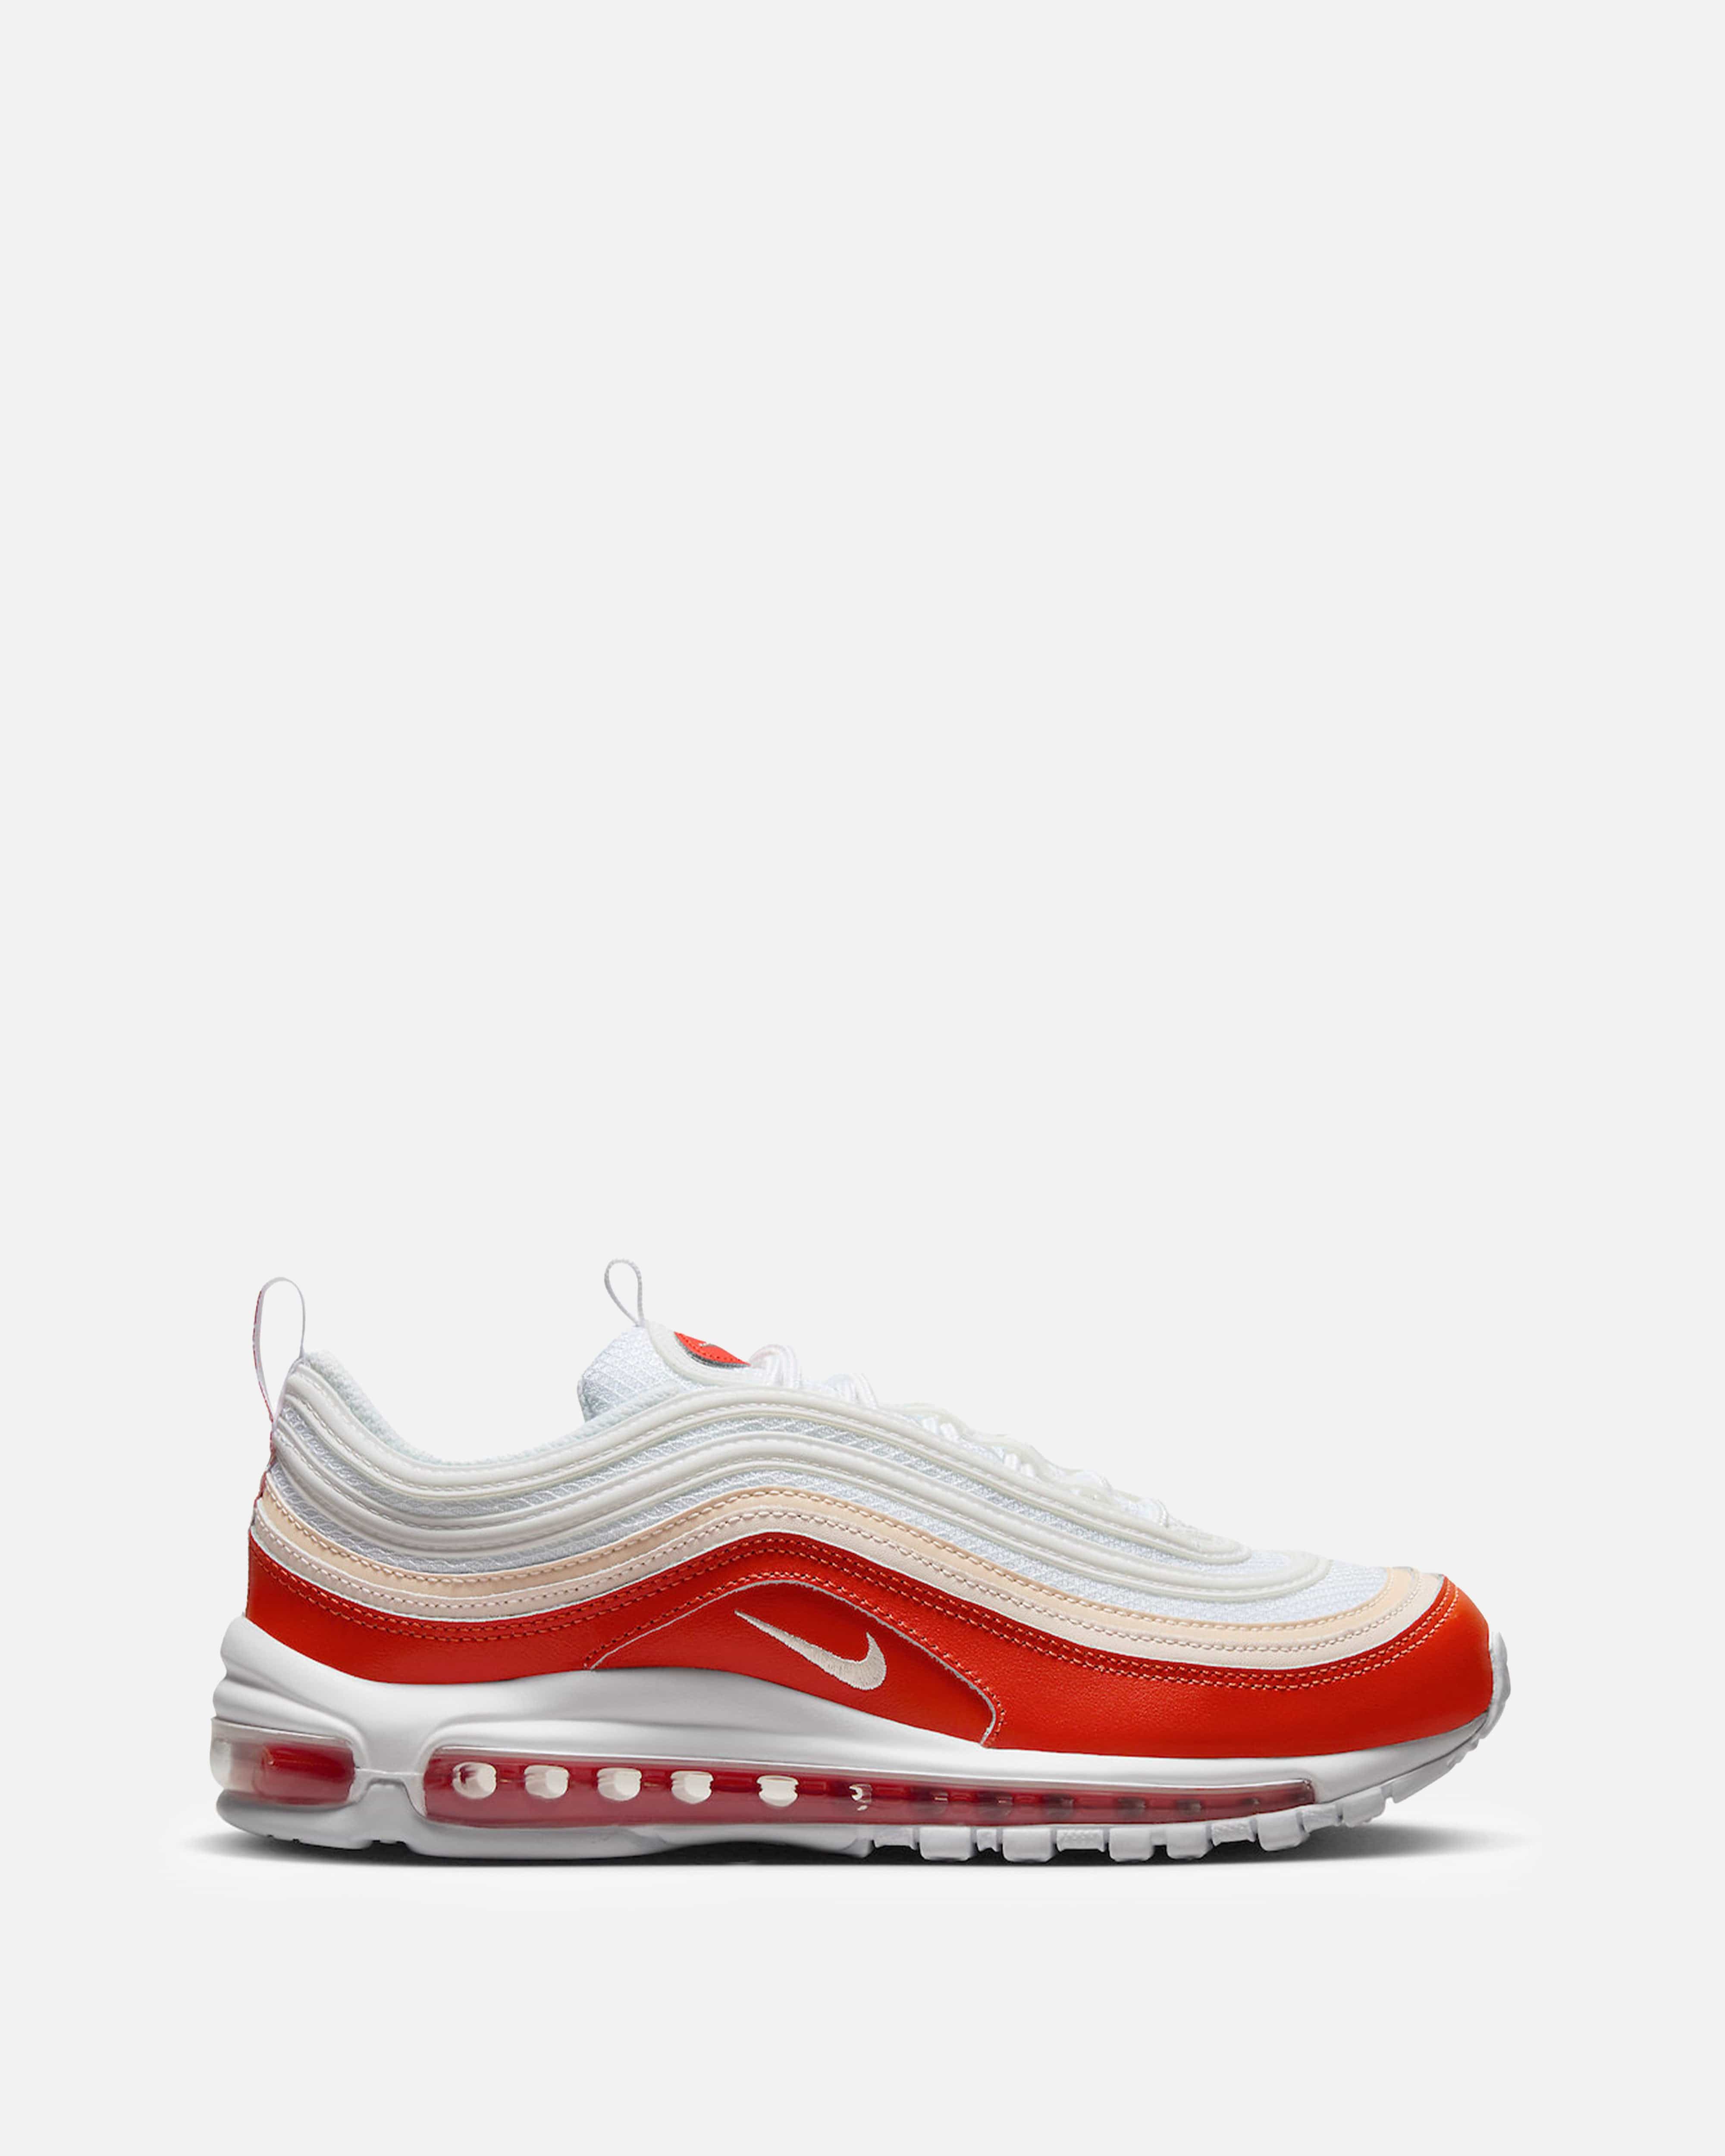 Air Max 97 'Picante Red' – SVRN